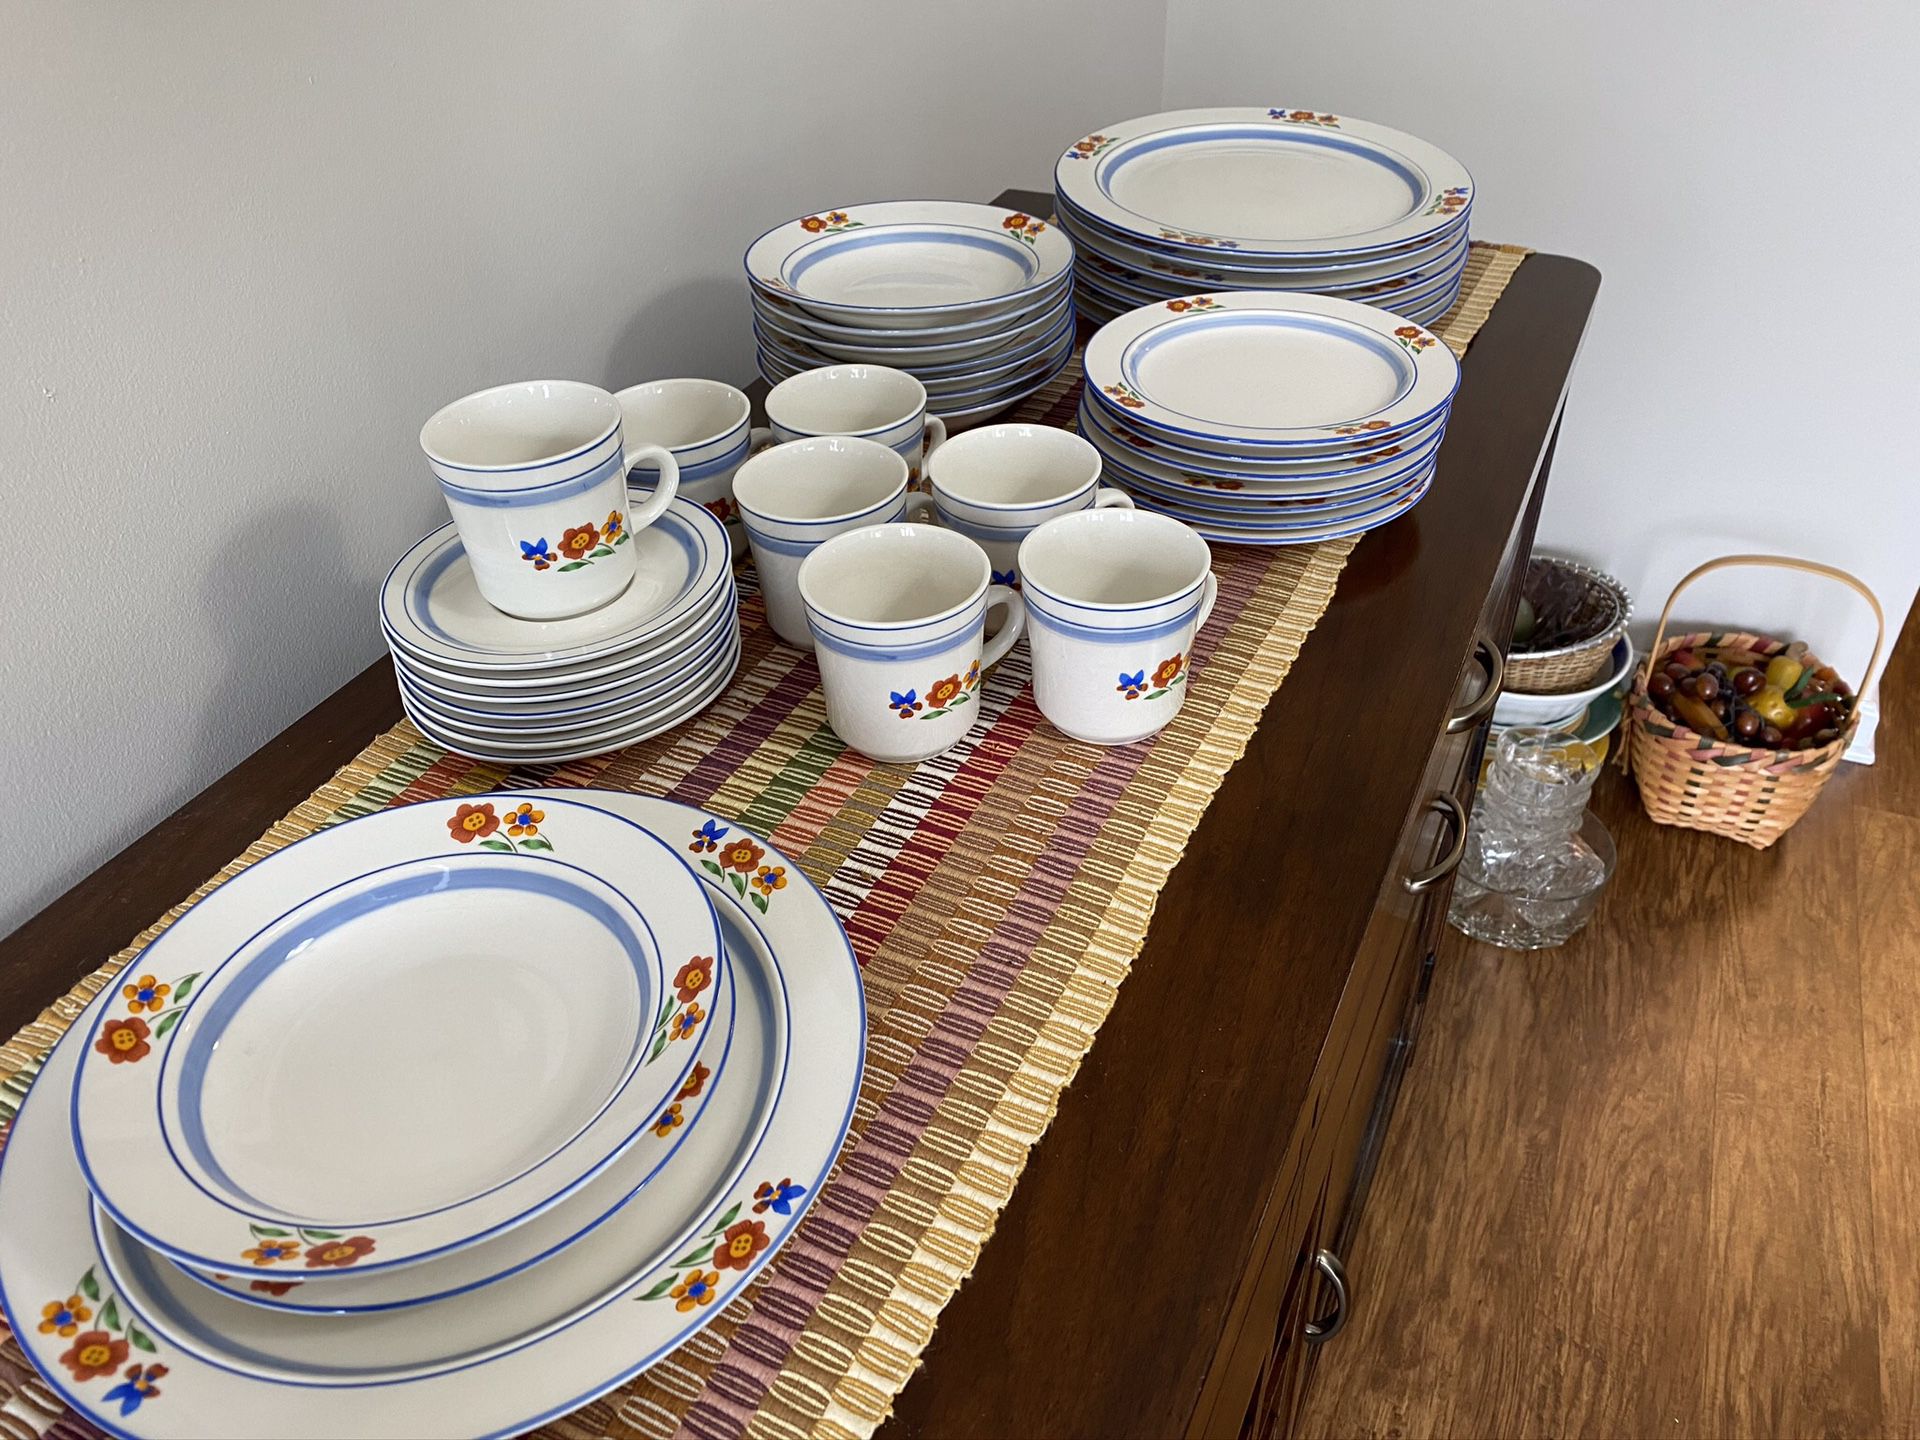 43 piece ceramic dinner set - 8 sets of large and medium plates, bowls, coffee cups, dessert plates, serving platters.